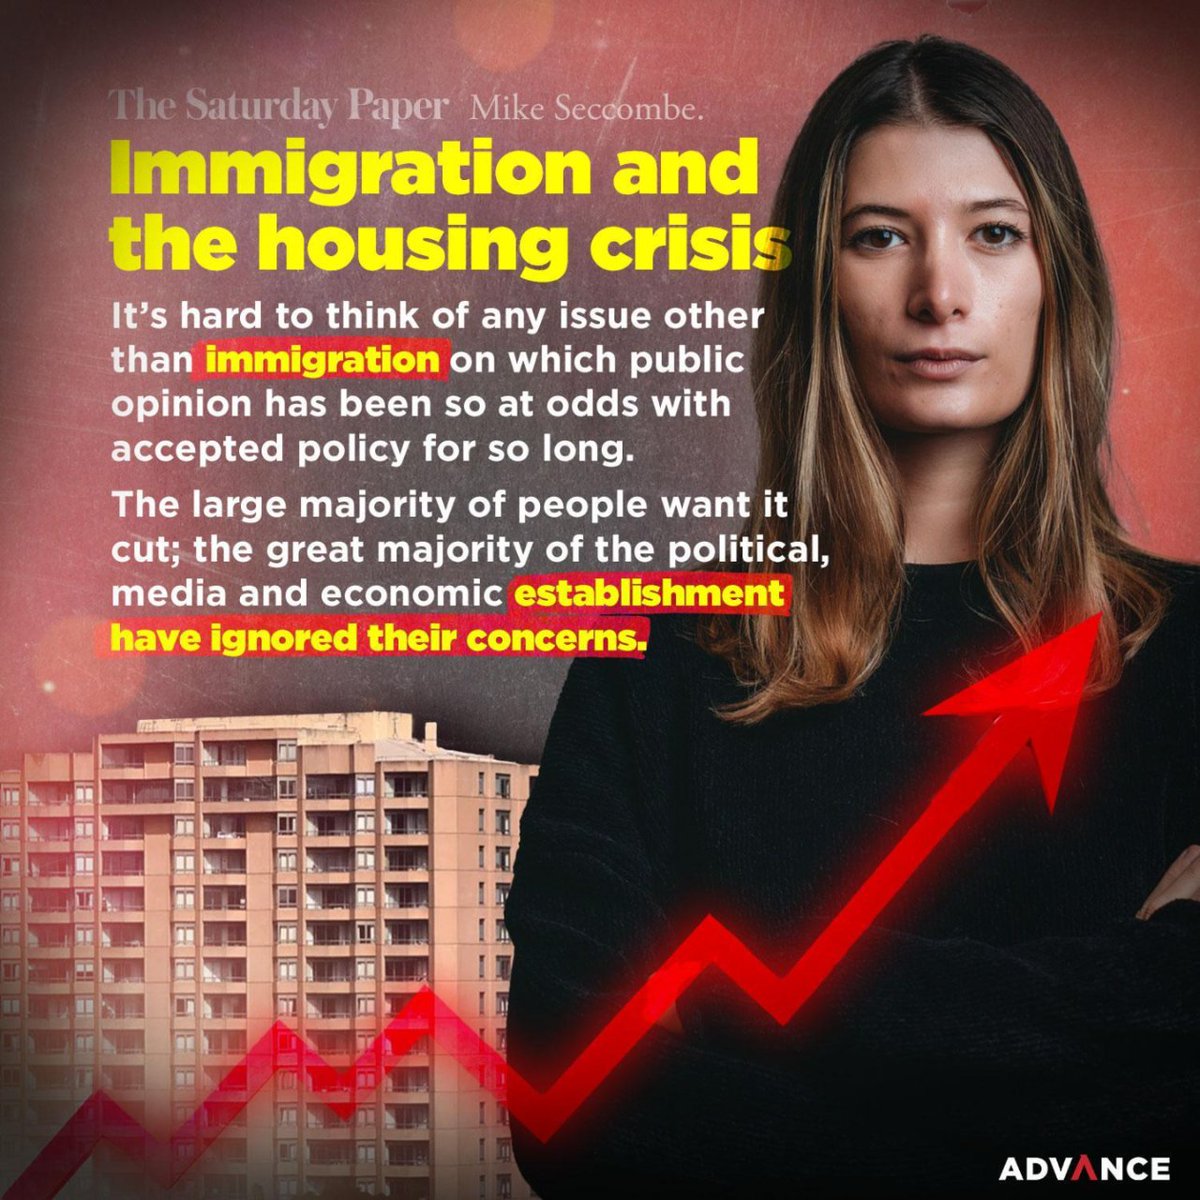 Hard working Aussie families and young people have been completely SCREWED OVER by the media, political and economic elites! They've ignored concerns from ordinary Australians about mass immigration pushing up rents and house prices for years!